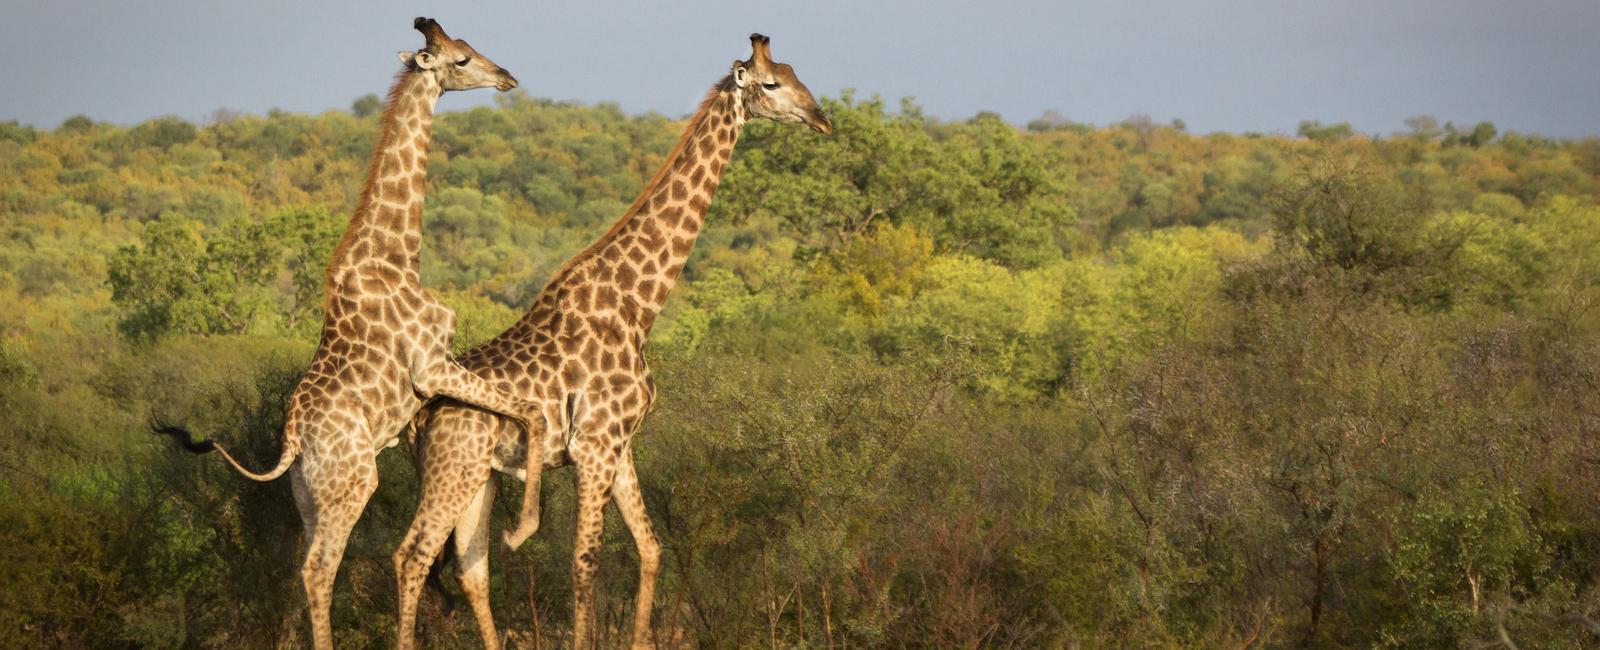 90 of male giraffes mate with other males scientists have found it isn t about sexual orientation adult giraffes mate with female giraffes as well